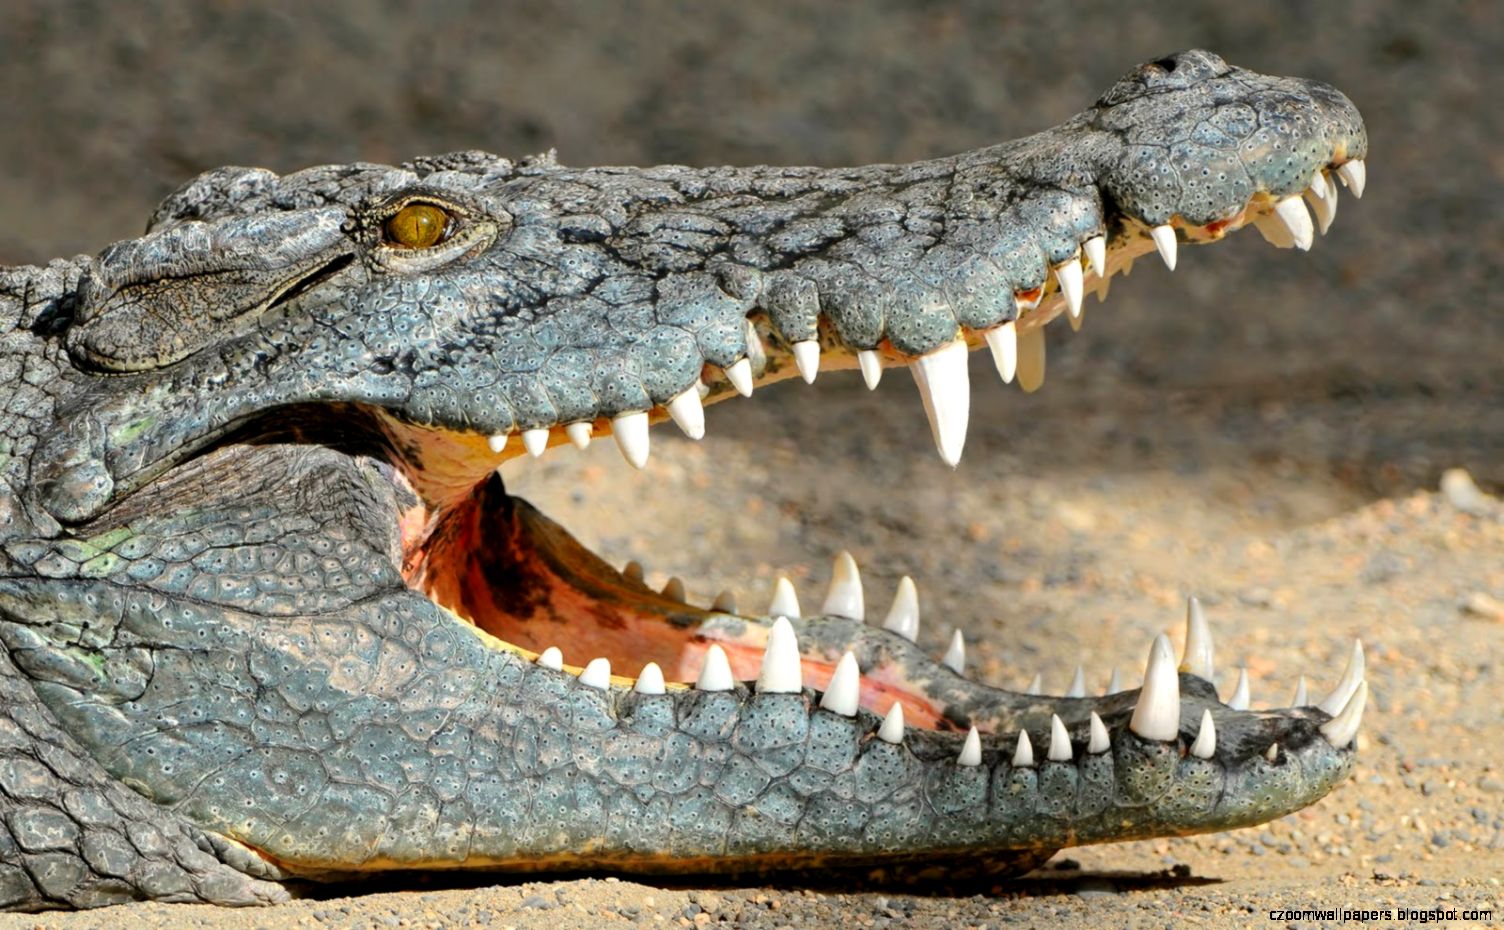 Awesome Hd Wallpapers Of Crocodile Attacks Cattle | Zoom Wallpapers